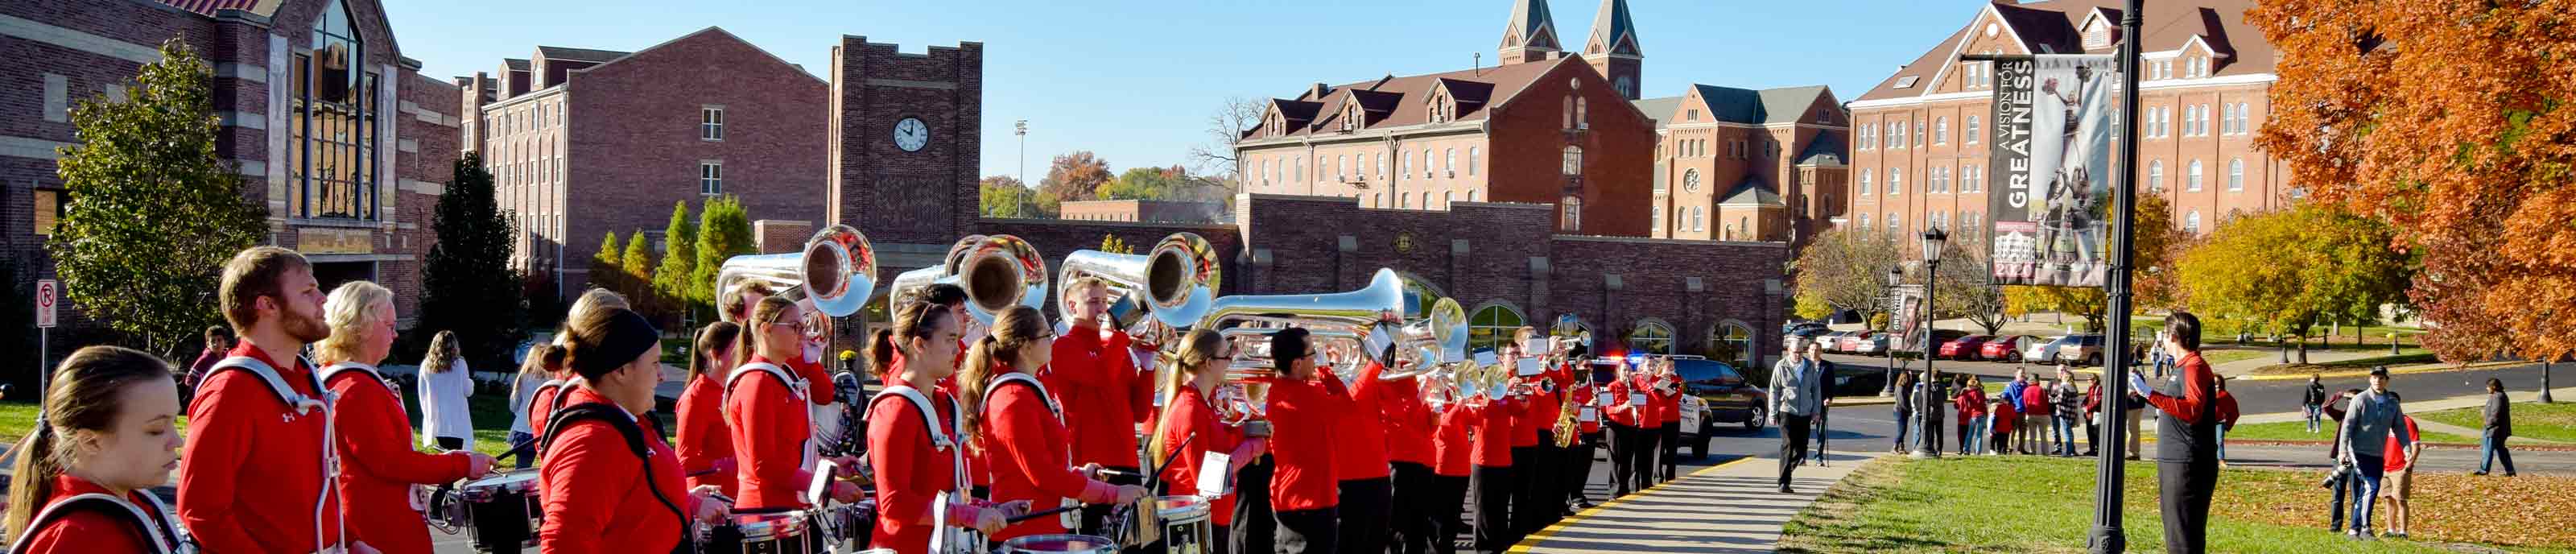 The Raven Regiment, Benedictine College's Marching Band, plays at a homecoming event